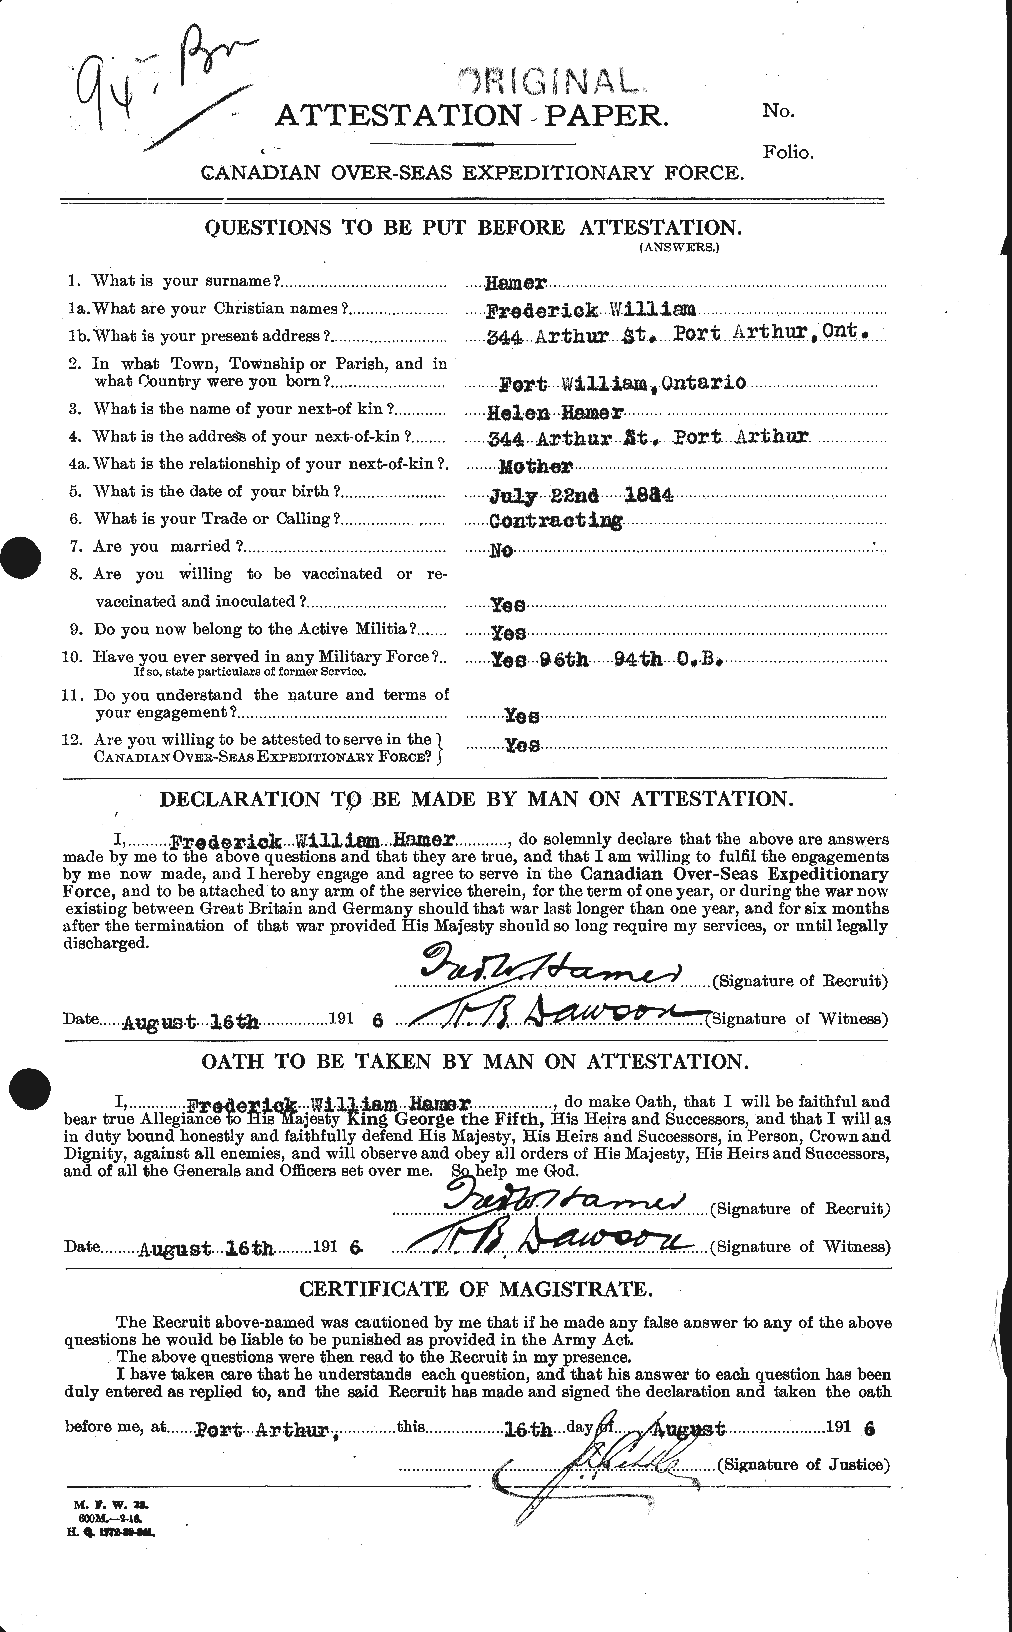 Personnel Records of the First World War - CEF 375078a